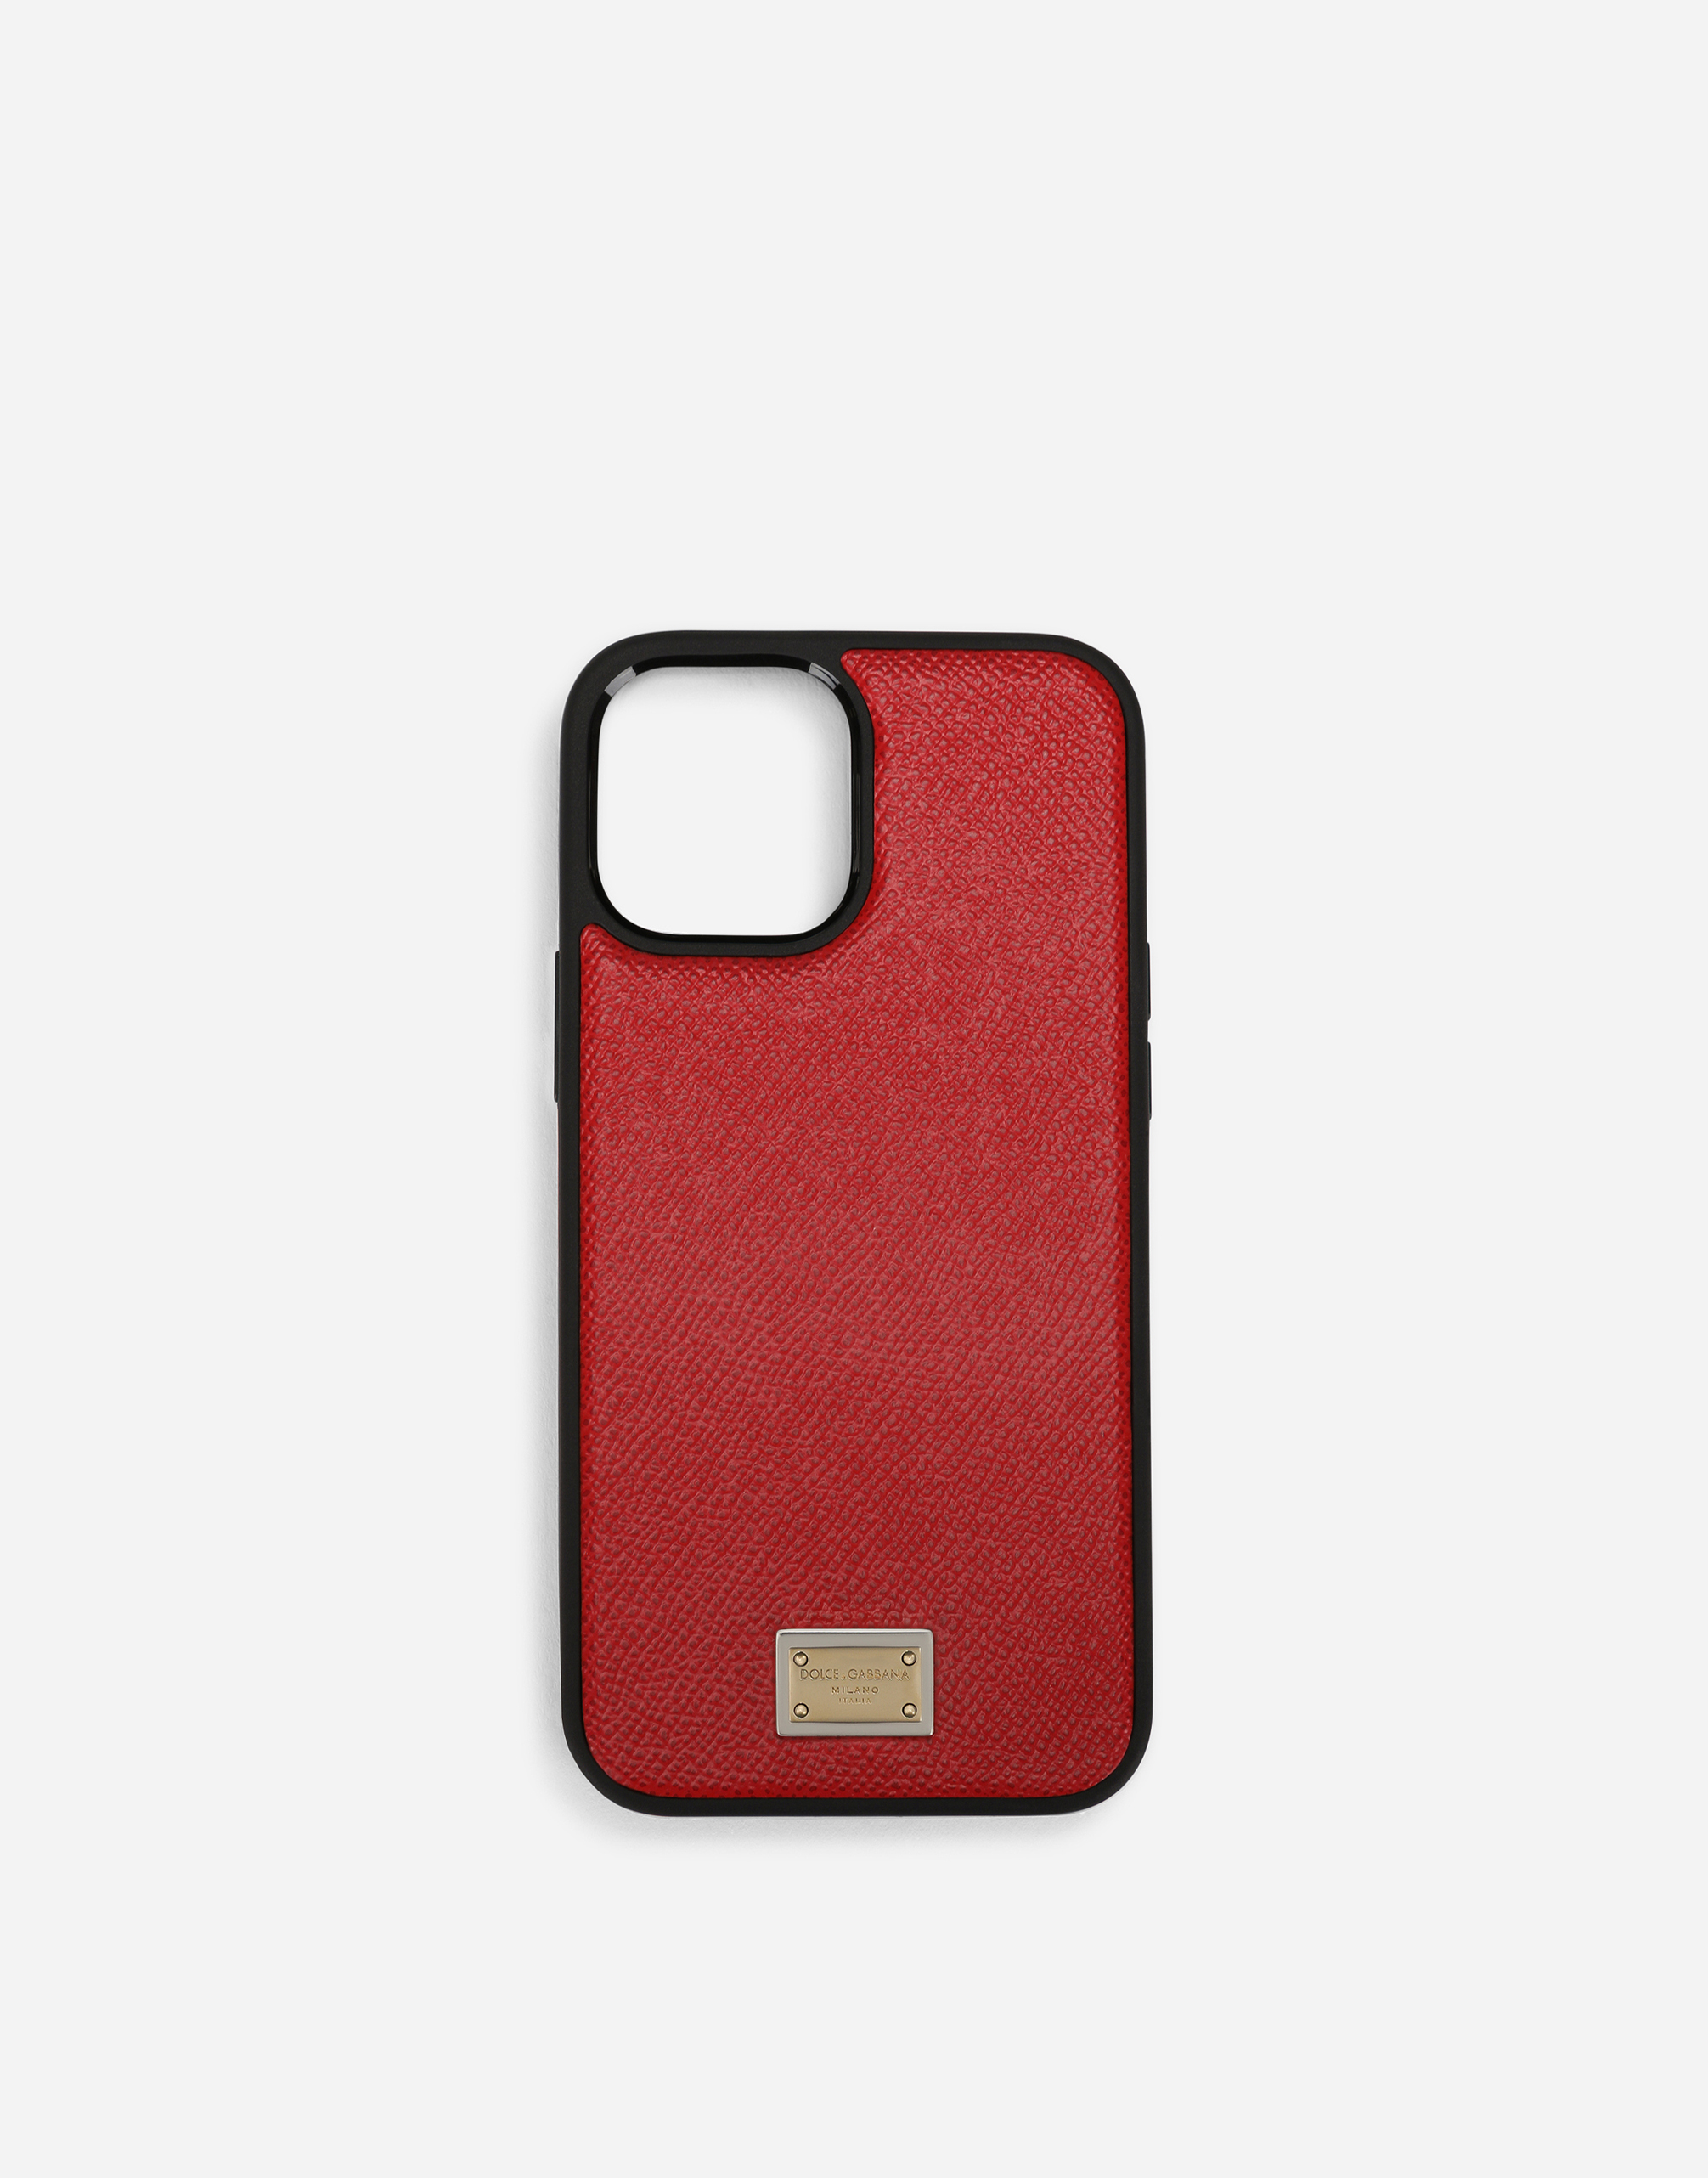 Dauphine calfskin iPhone 12 Pro cover with plate in Red